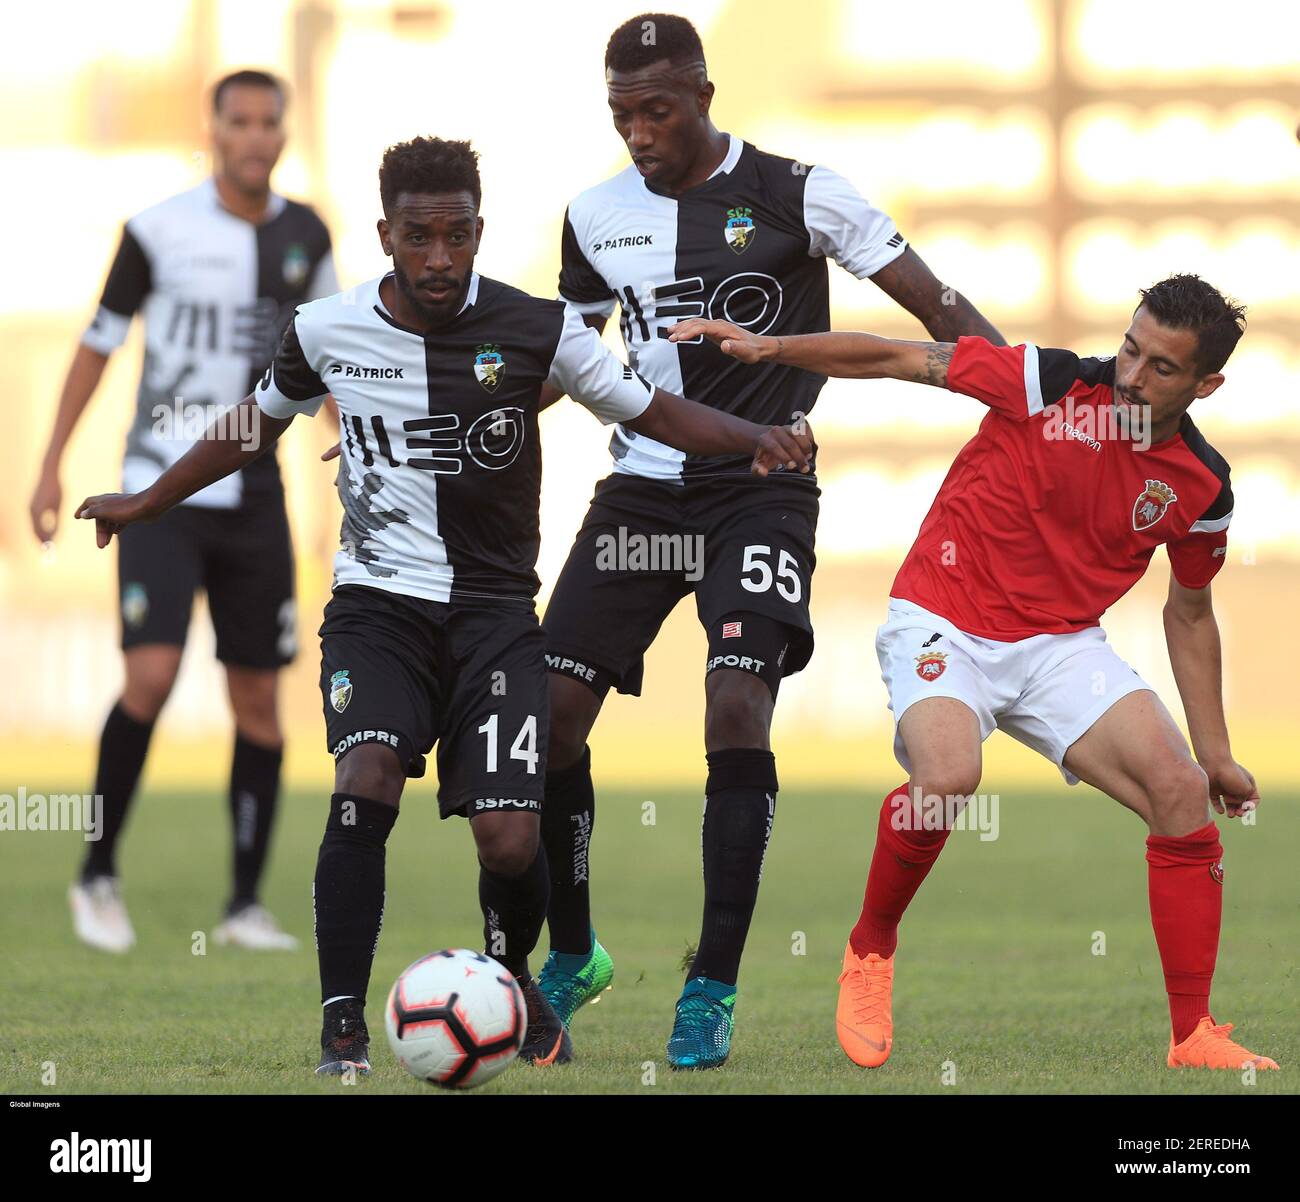 Faro, 07/21/2018 - Sporting Clube Farense received this afternoon the  Penafiel Football Club, in the EstÃ¡dio de São Luis, in game to count for  the 1st Matchday 1 of the 2018/2019 League